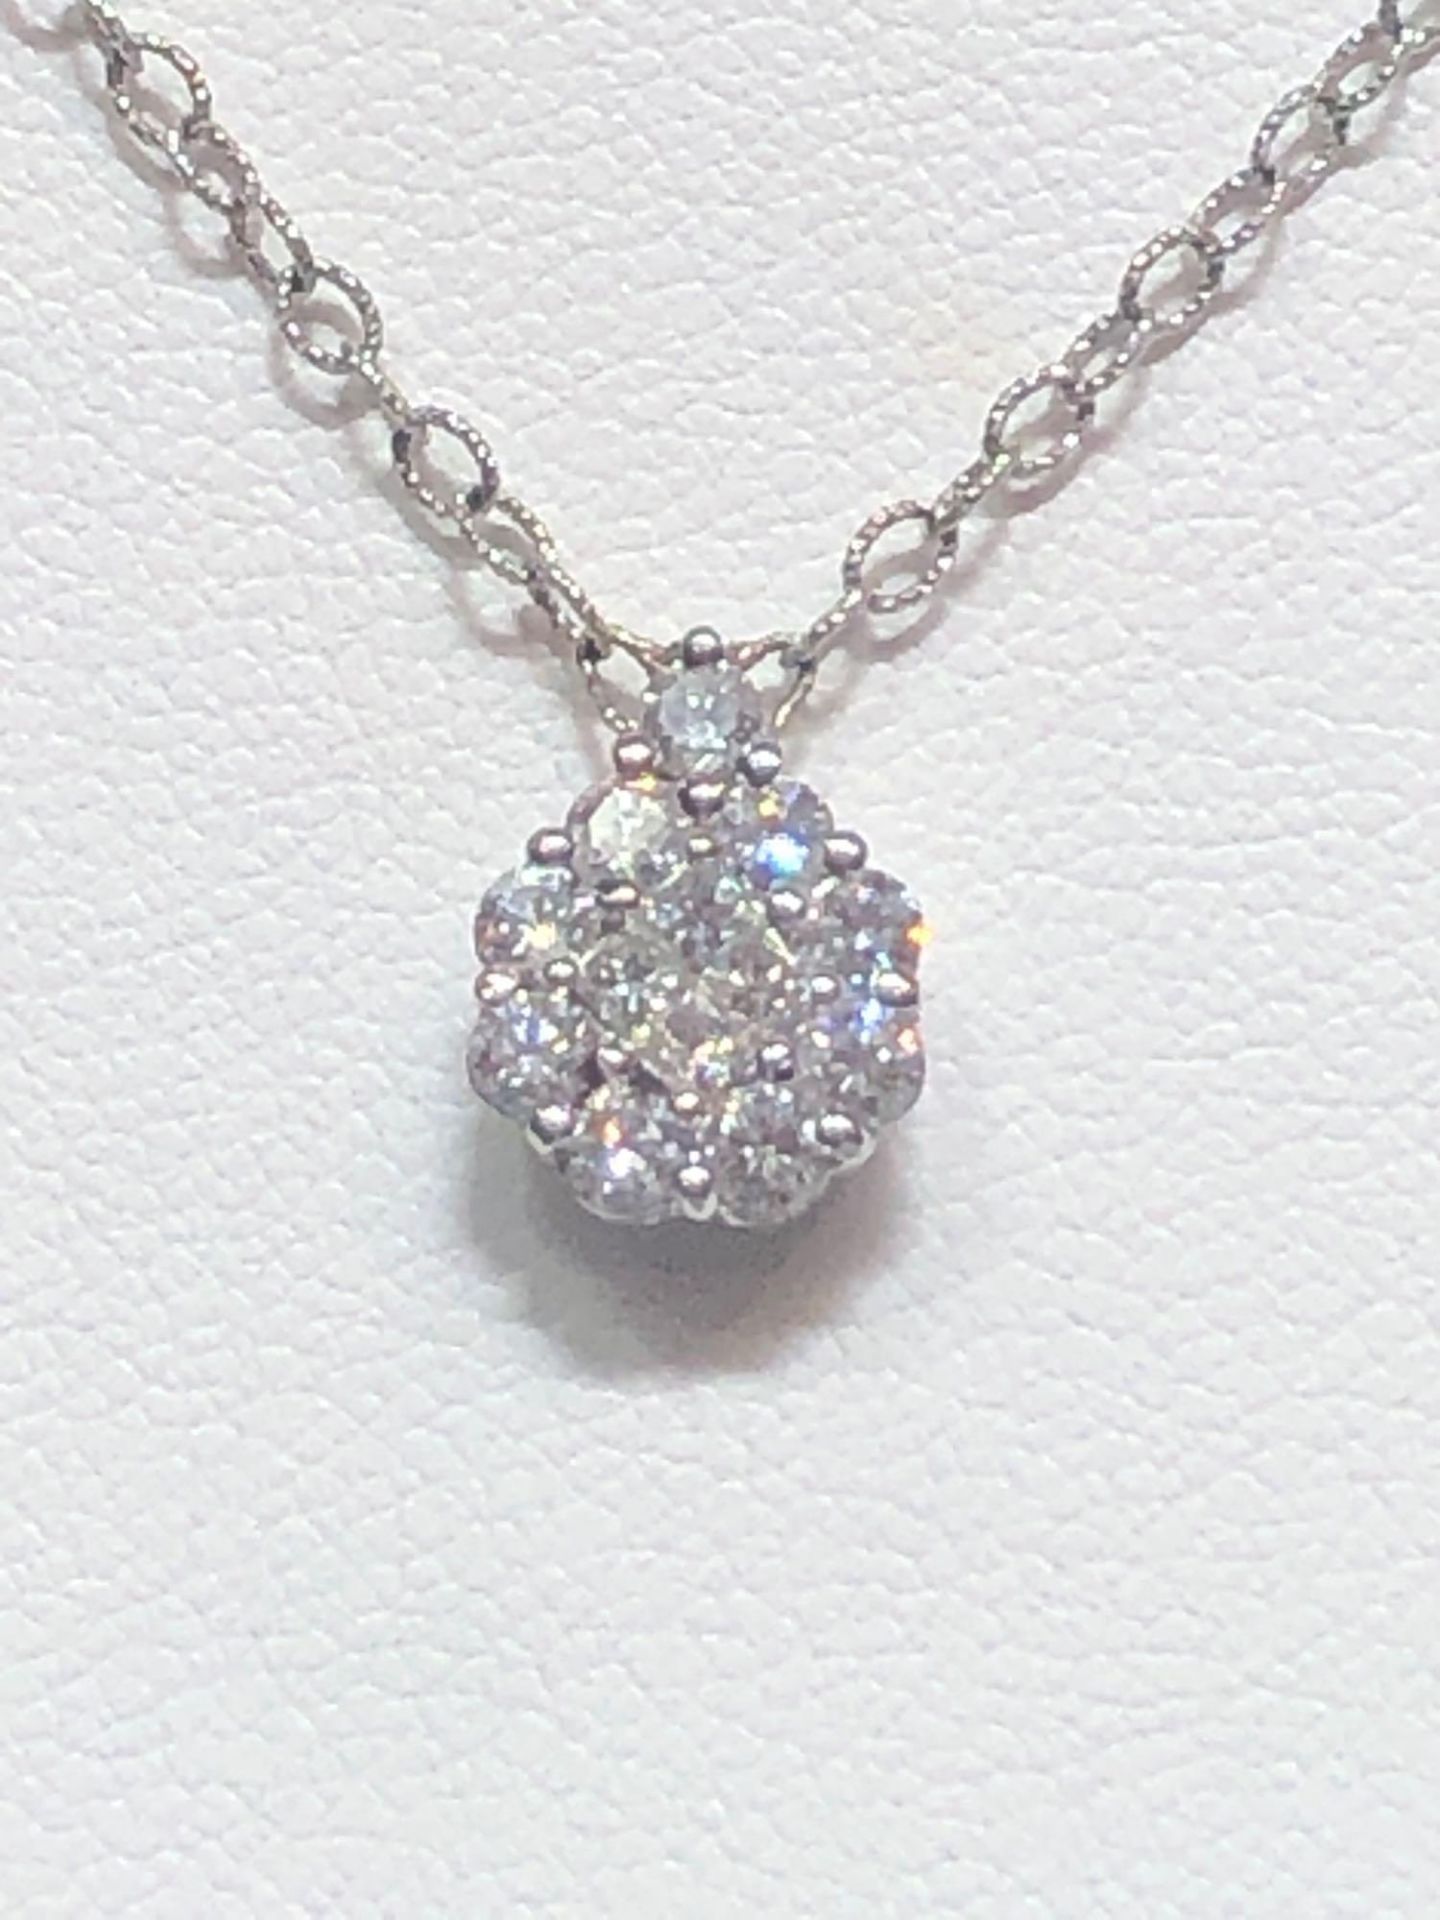 .75CT ROUND DIAMOND NECKLACE 14KT WHITE GOLD - Image 2 of 4